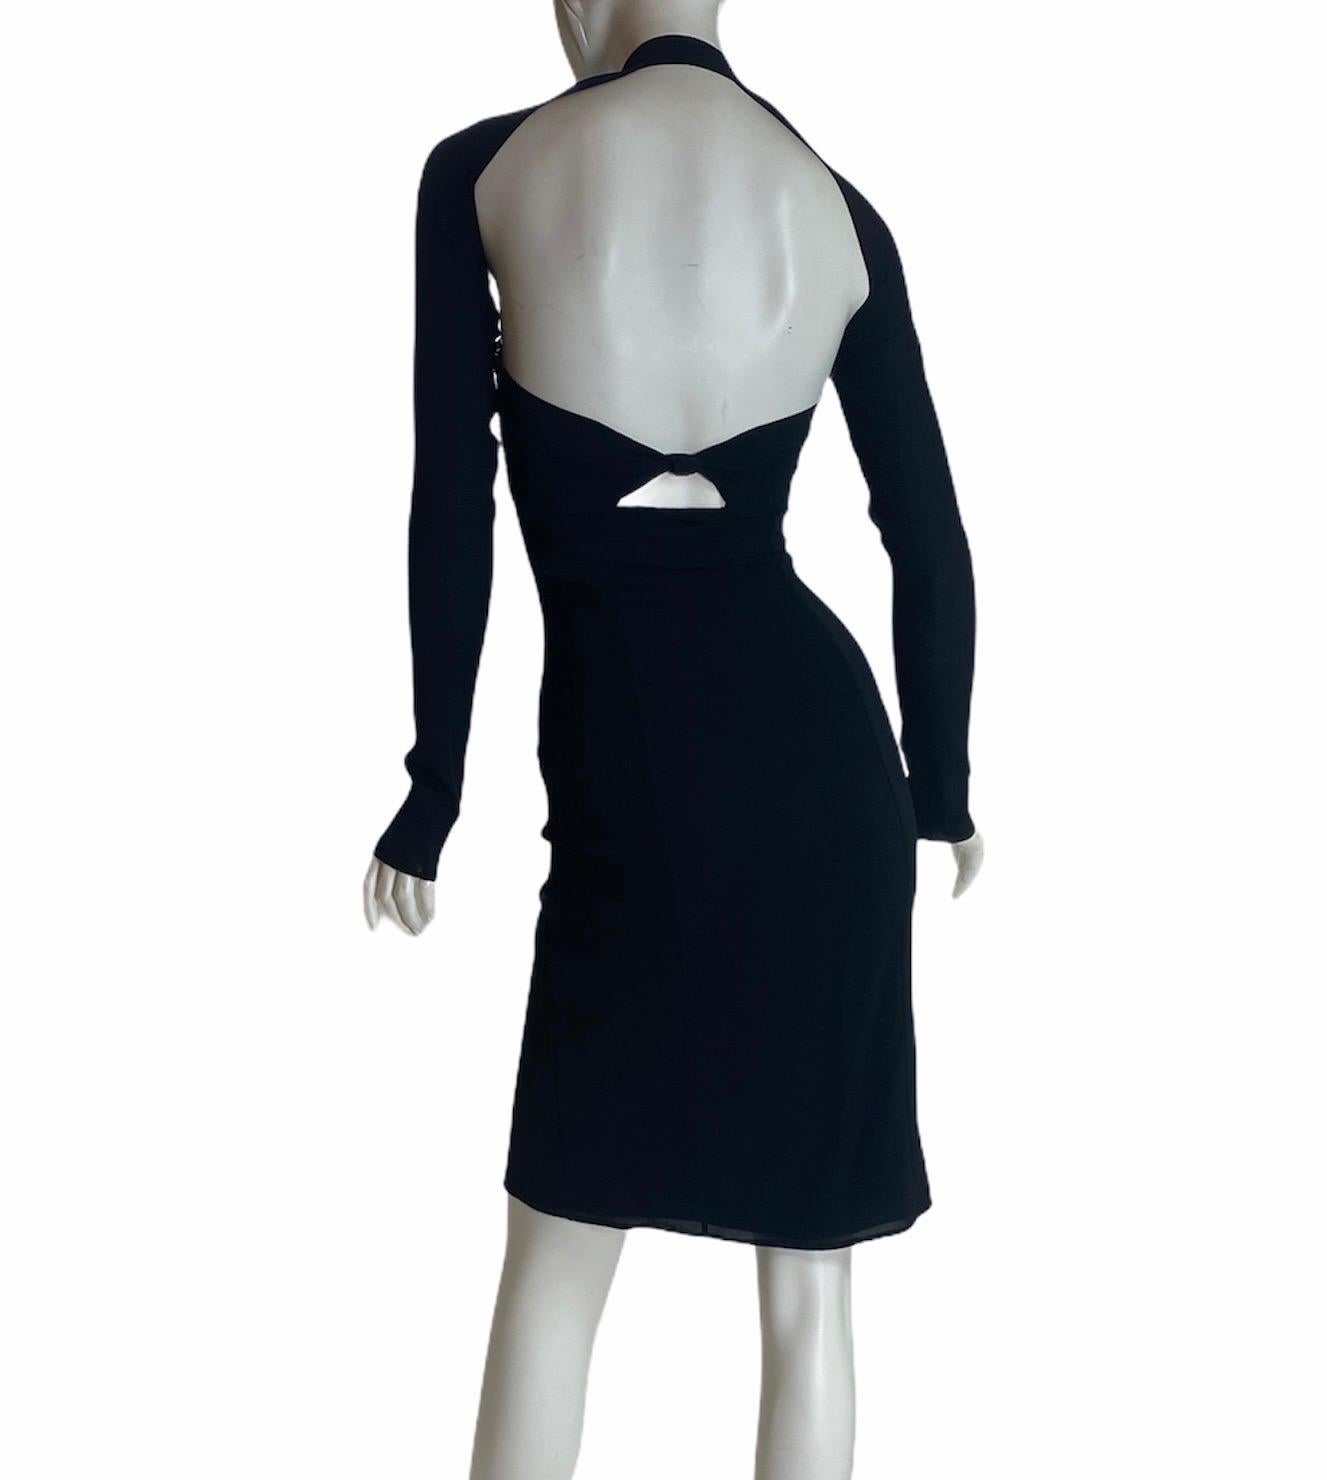 Iconic Vintage Tom Ford for Gucci Black Dress Size 38 In Excellent Condition For Sale In Montgomery, TX